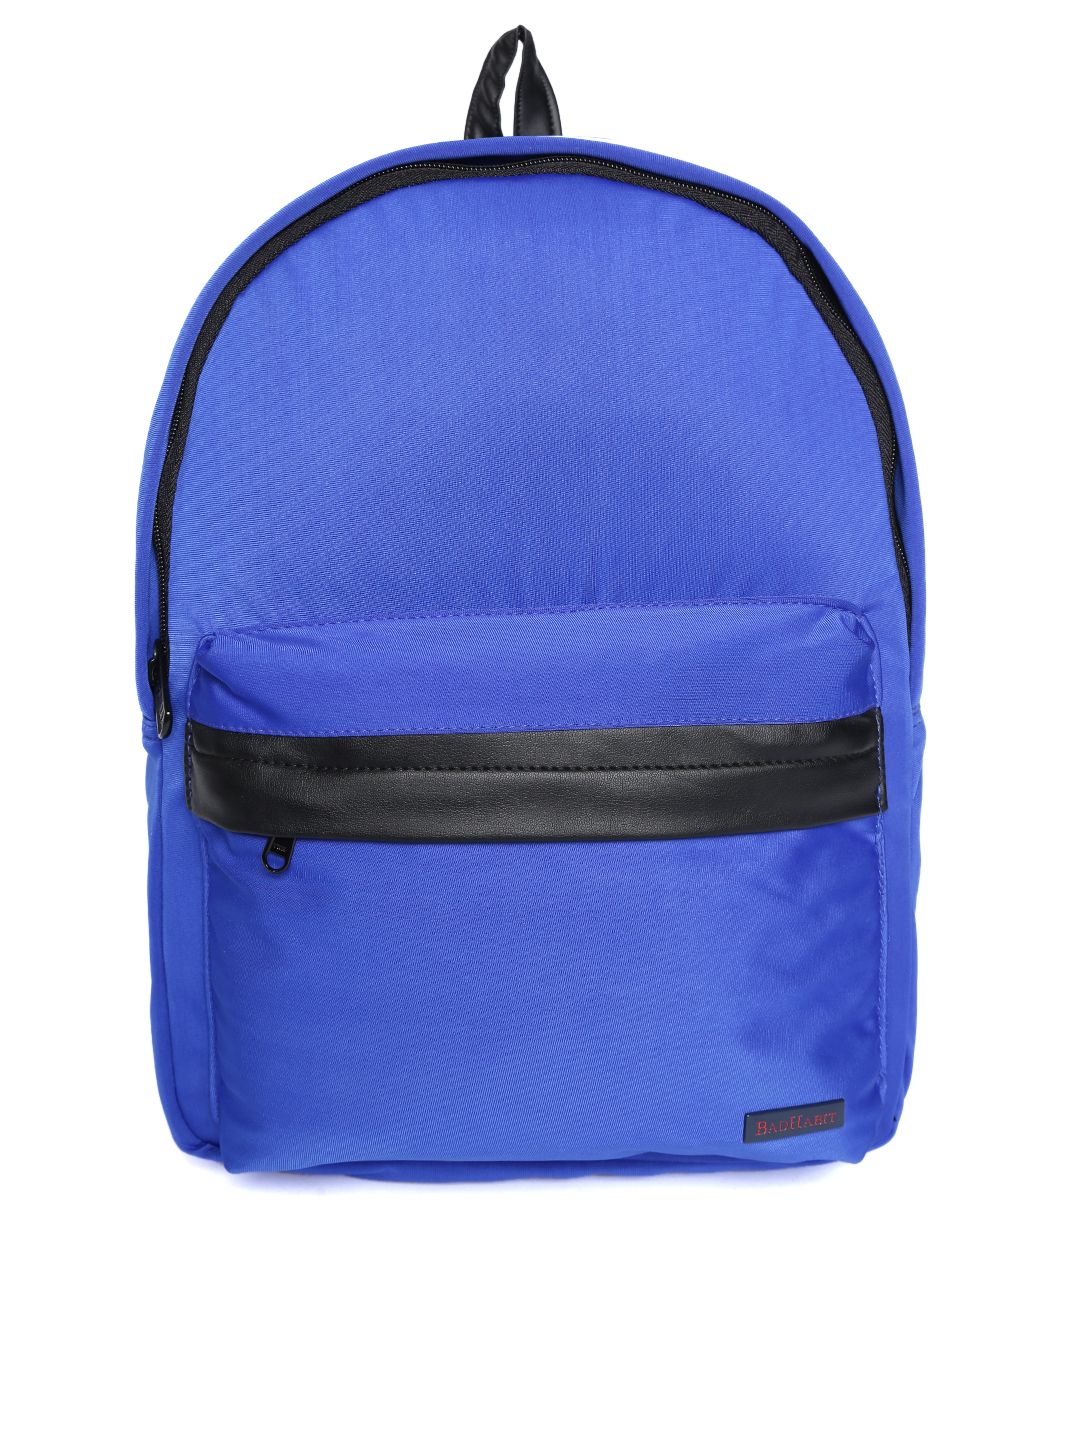 BAD HABIT Unisex Blue Solid Backpack Price in India